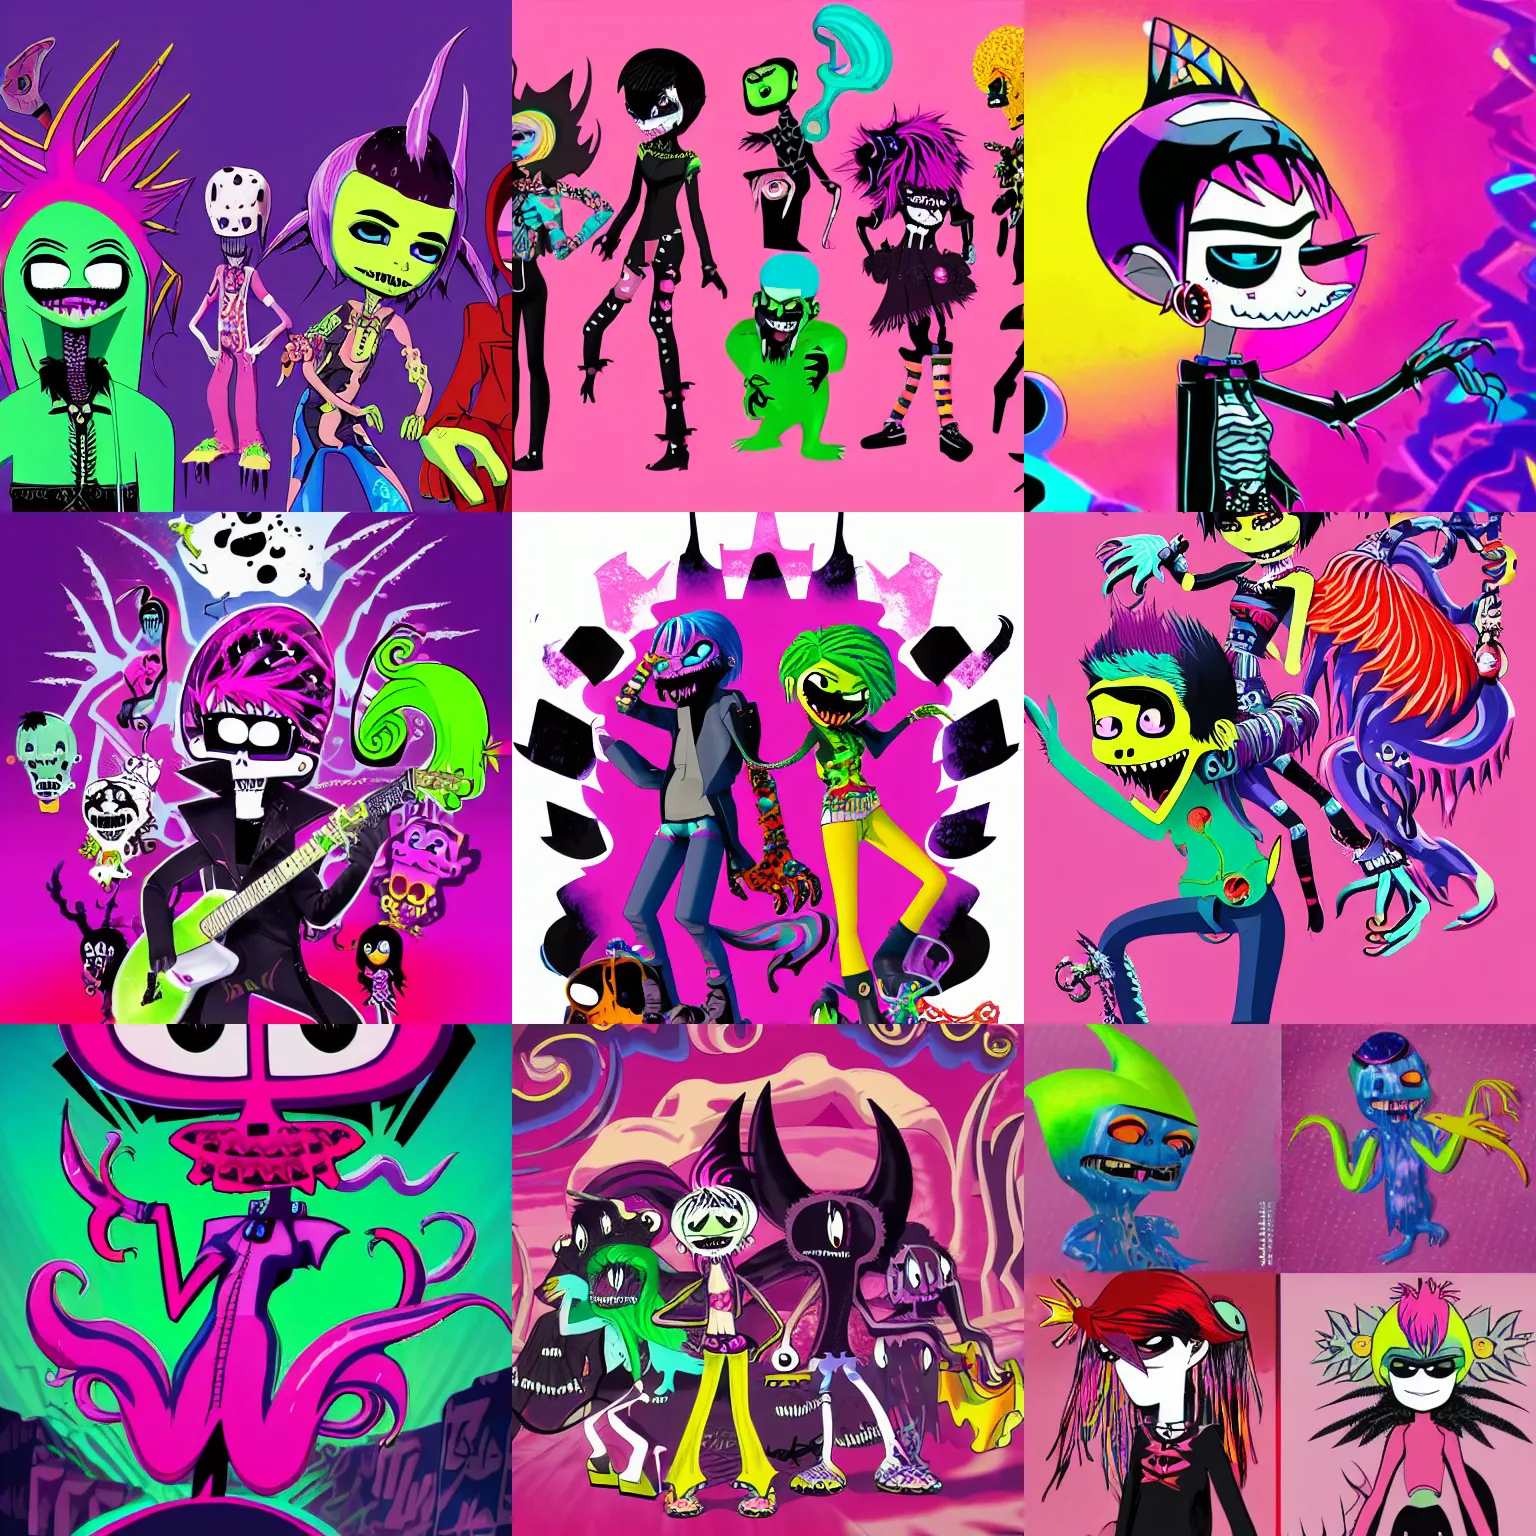 Prompt: CGI lisa frank gothic punk vampiric electrifying vampiric squid character designs of varying shapes and sizes by genndy tartakovsky and Jamie Hewlett from gorillaz and the creators of fret nice high resolution, rtx